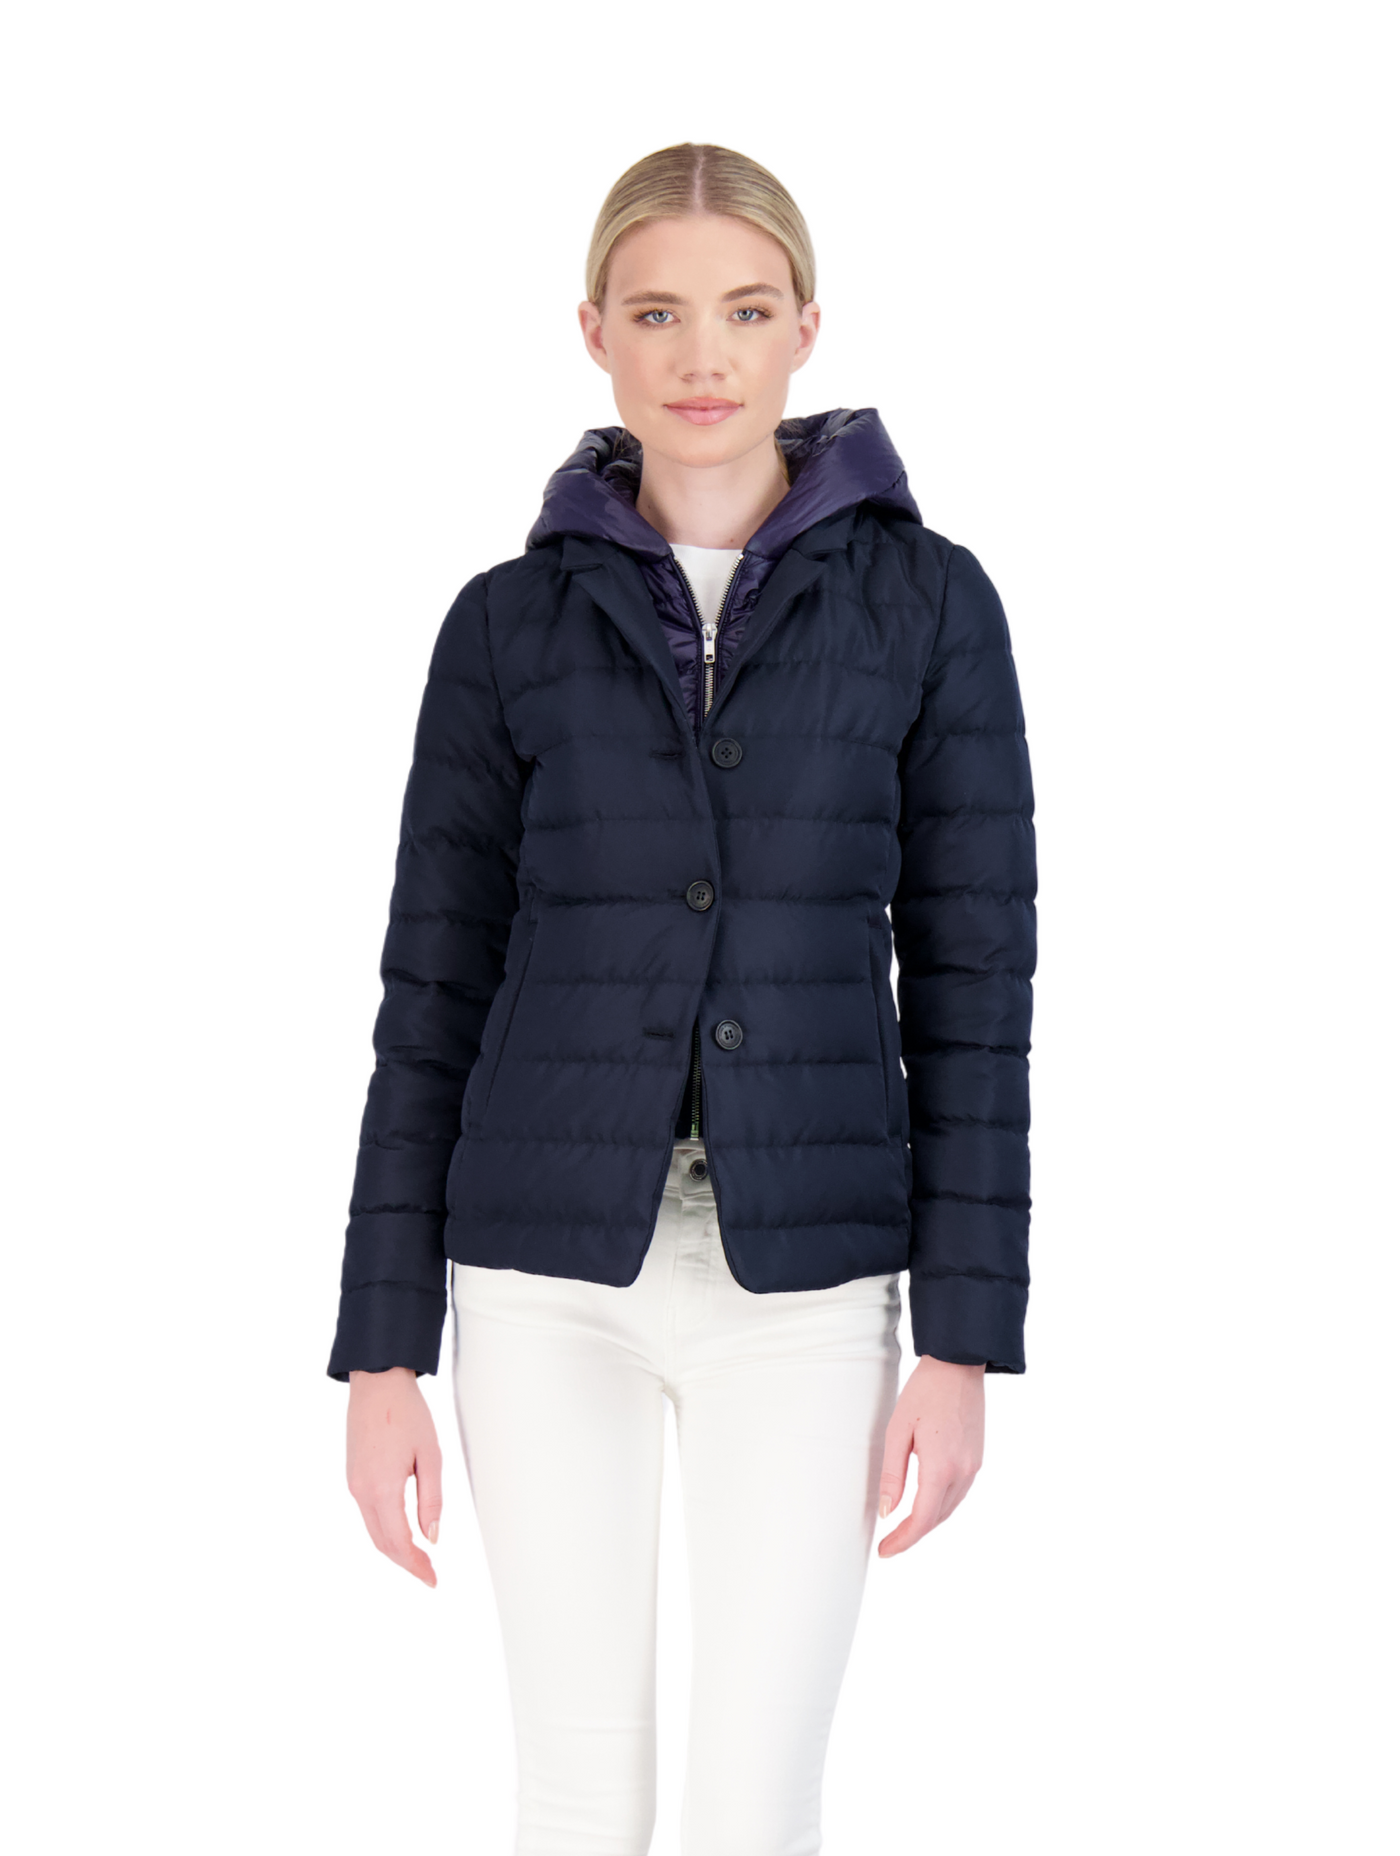 The Devon 2-1 Down Jacket with hood